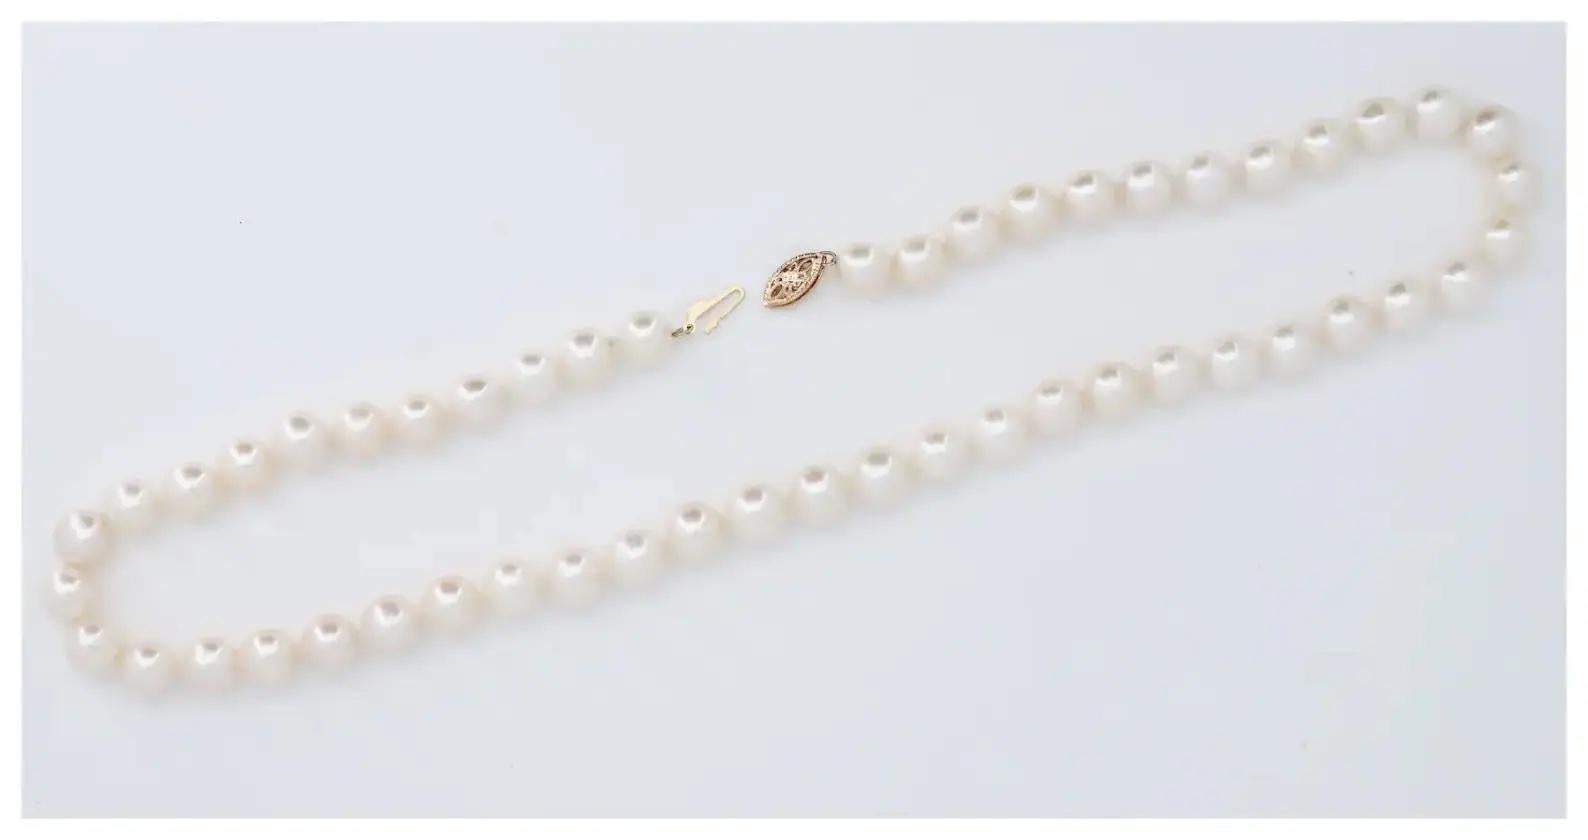 A vintage saltwater south sea pearl necklace strung on knotted white silk.

Featuring well matched 8.5mm South Sea cultured pearls completed by a 14 karat gold filigree clasp.

Hallmarked, and tested as 14 karat gold.

Measurements: 17